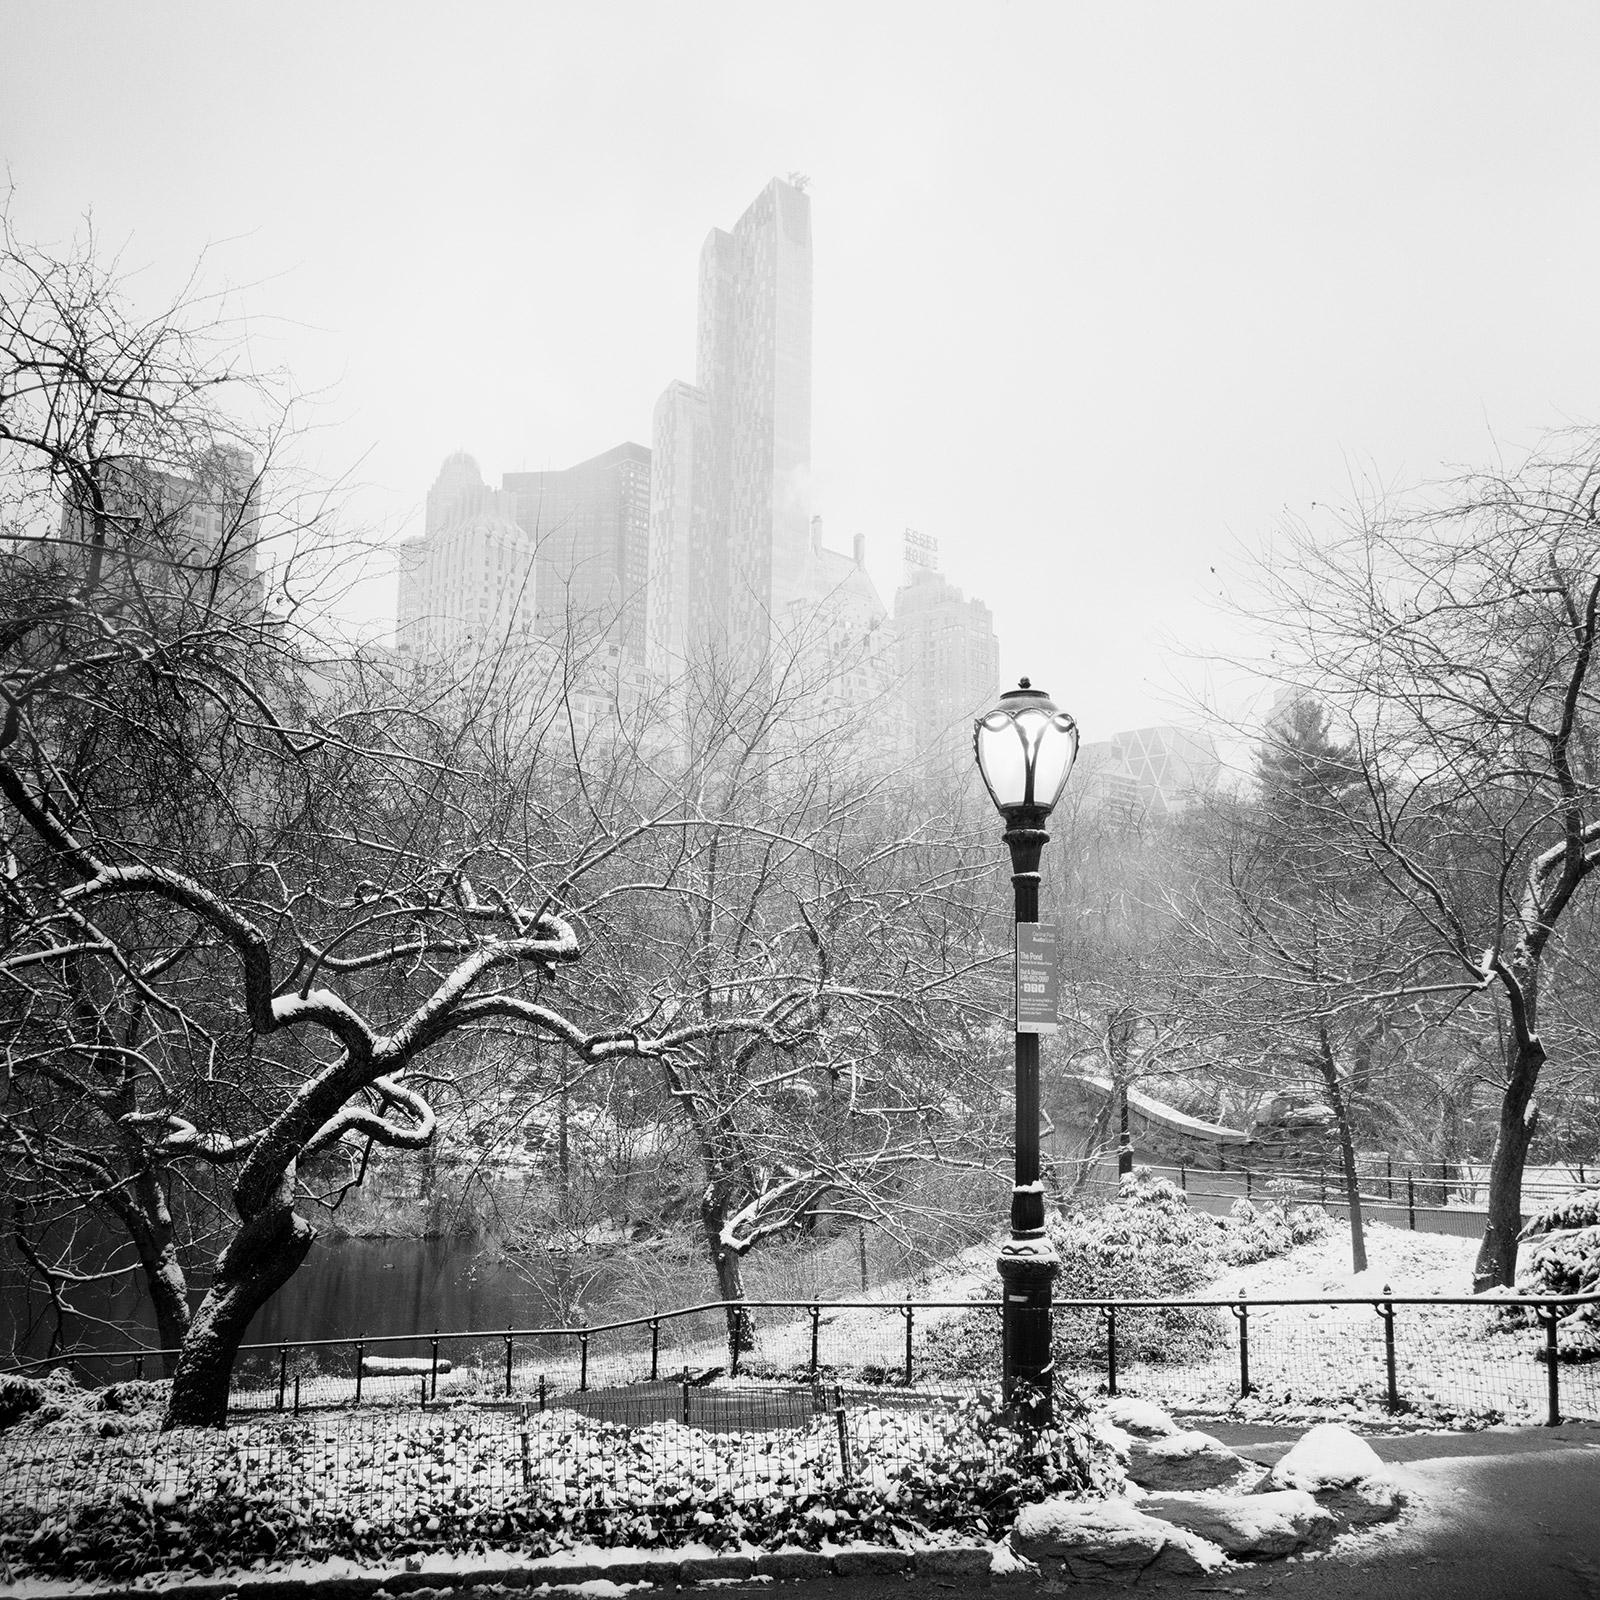 Snow covered Central Park, New York City, black and white photography, landscape